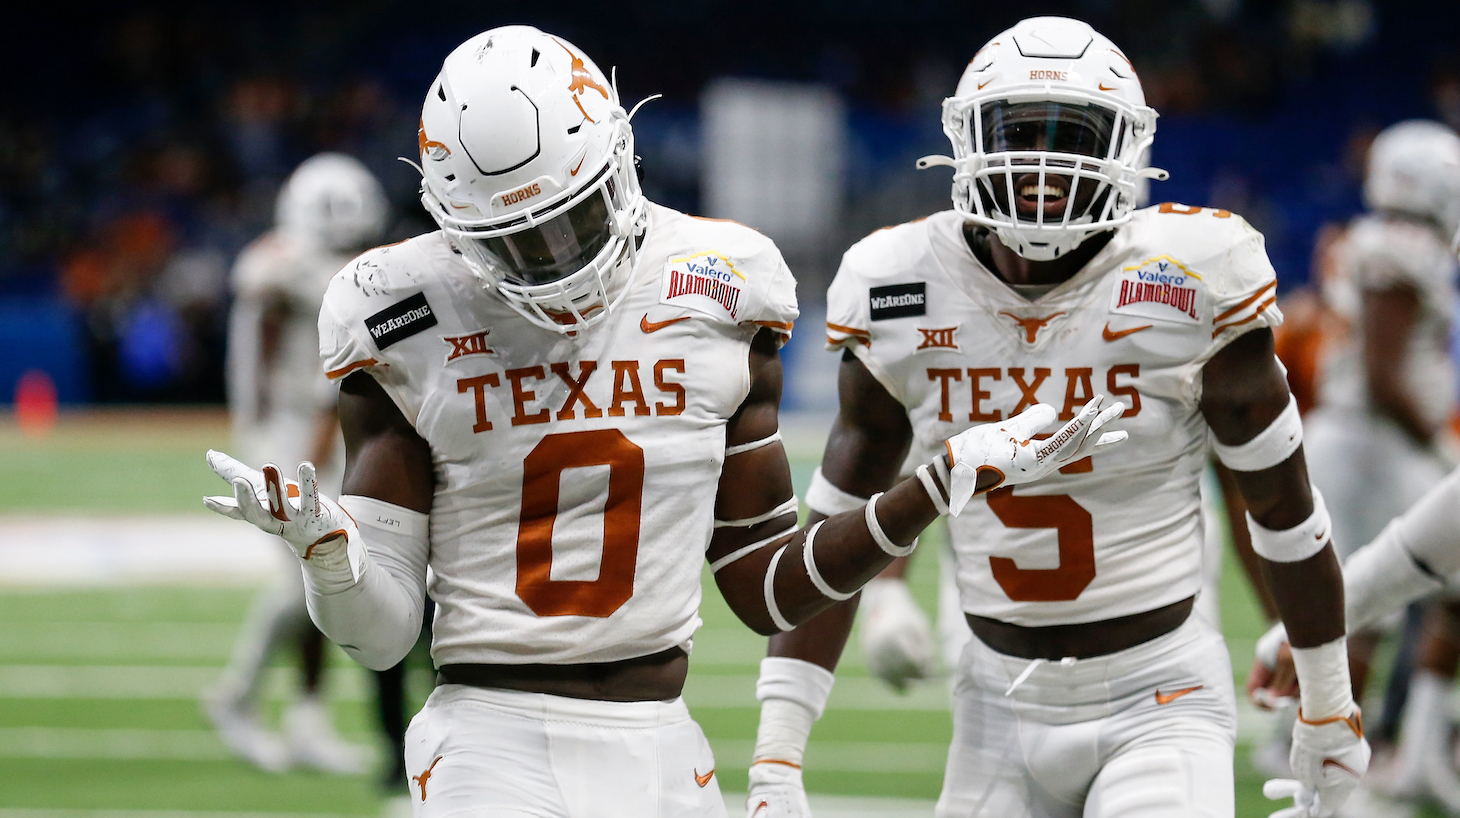 SAN ANTONIO, TEXAS - DECEMBER 29: DeMarvion Overshown #0 and D'Shawn Jamison #5 of the Texas Longhorns react after a turnover in the fourth quarter against the Colorado Buffaloes during the Valero Alamo Bowl at the Alamodome on December 29, 2020 in San Antonio, Texas. (Photo by Tim Warner/Getty Images)